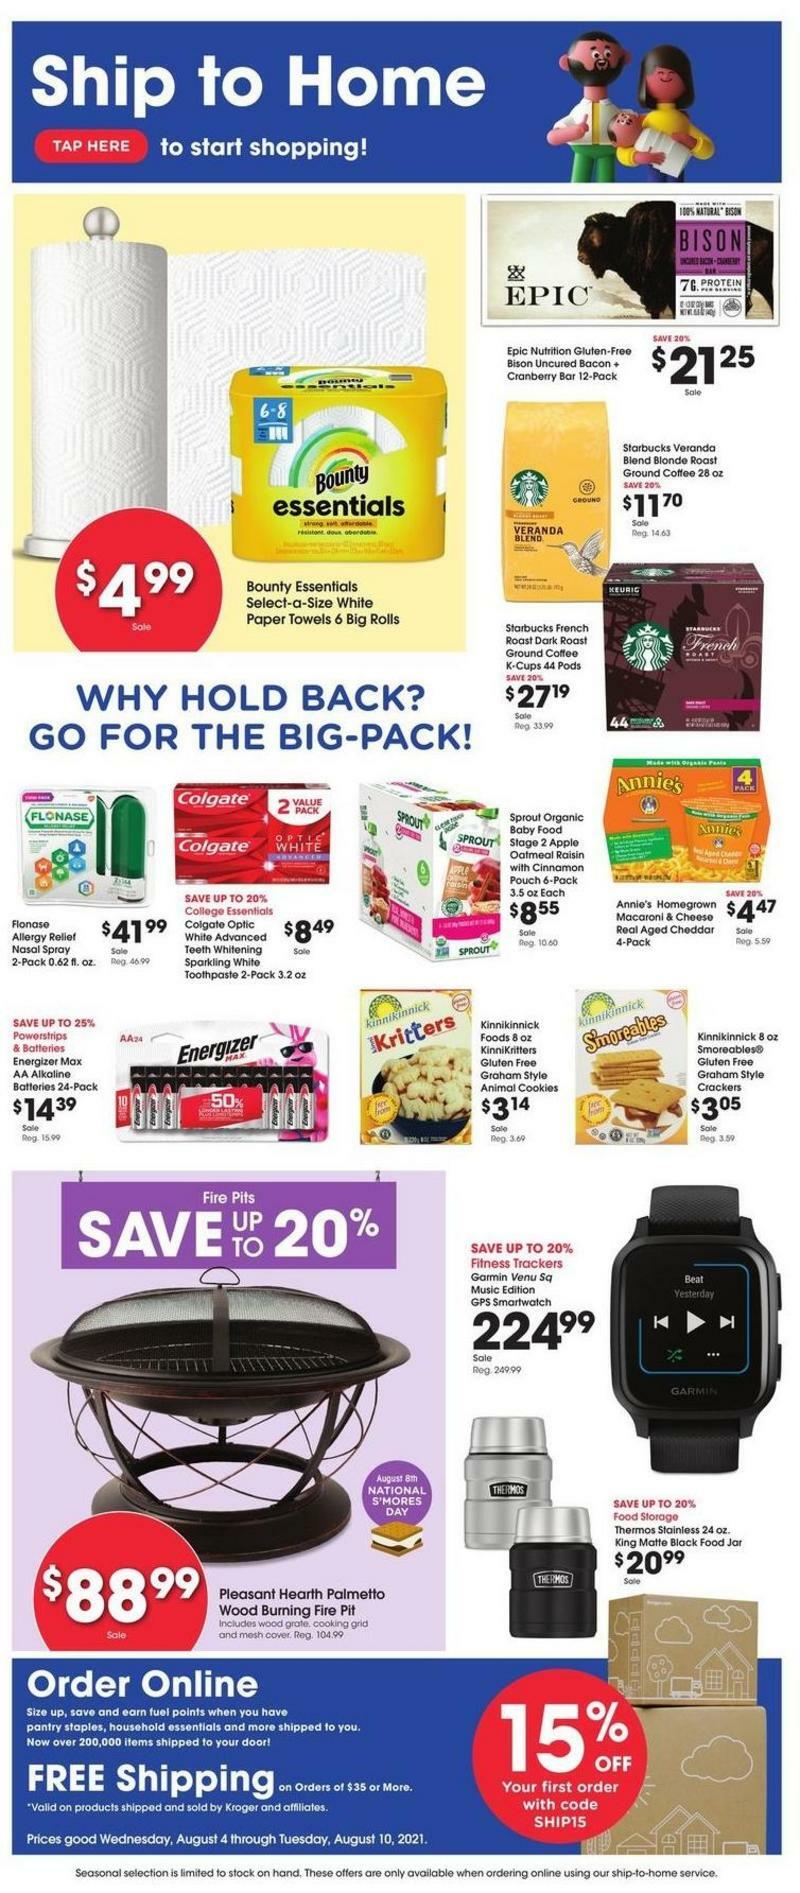 Kroger Ship to Home Weekly Ad from August 4